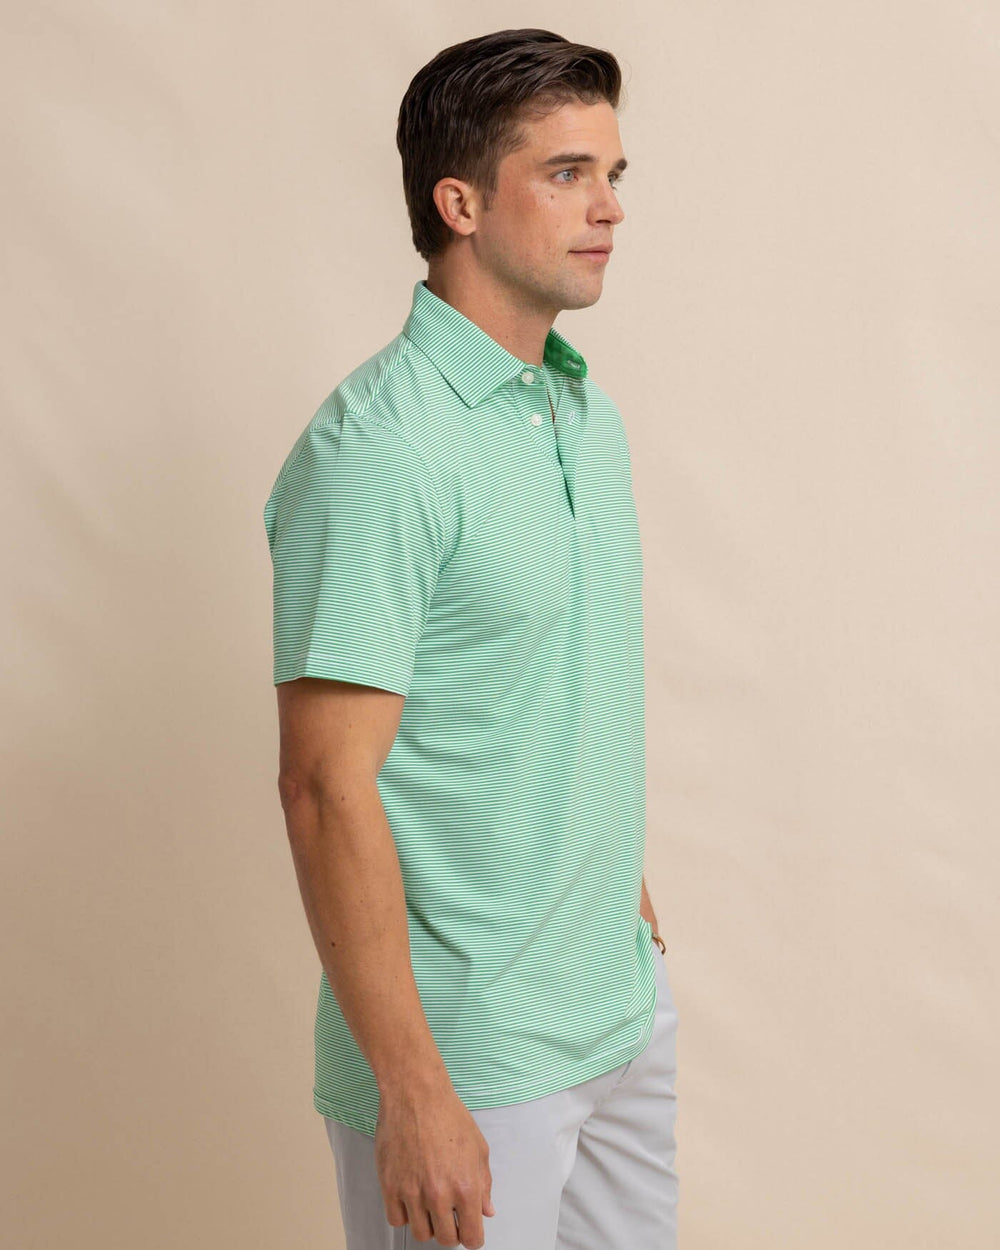 The front view of the Southern Tide brrr-eeze-meadowbrook-stripe-polo by Southern Tide - Lawn Green